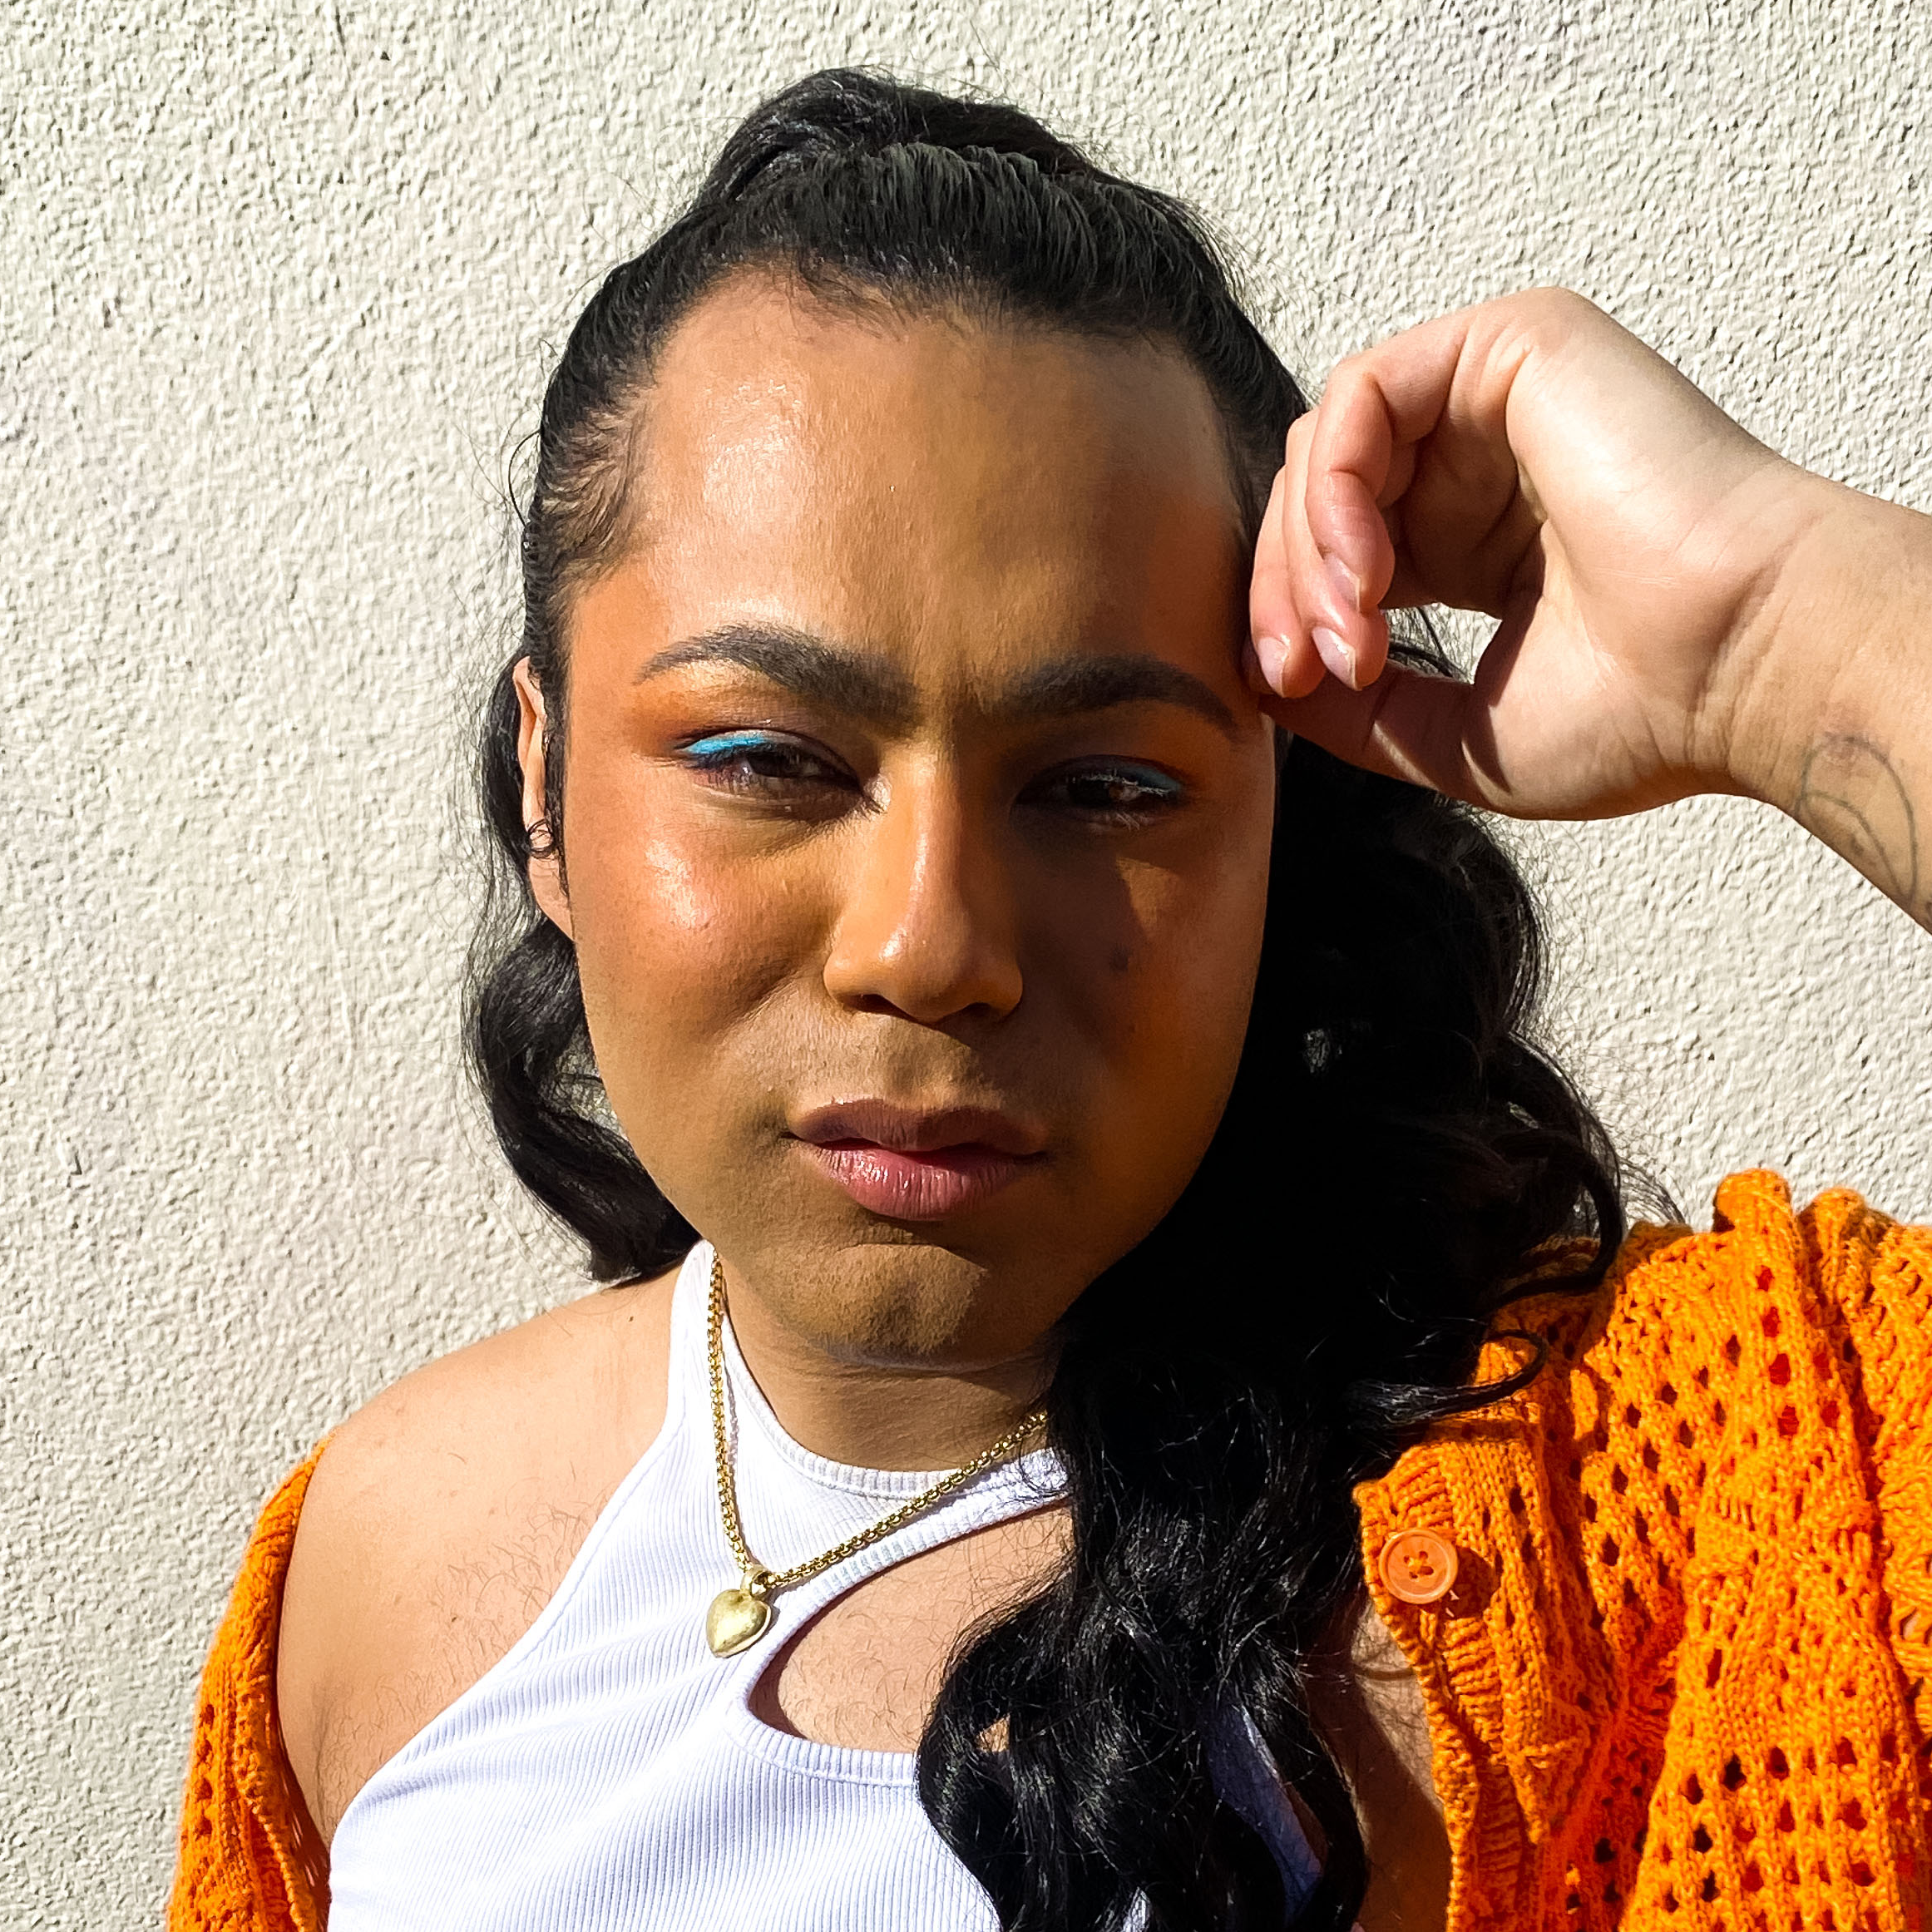 A portrait of Travis looking into the camera, head resting on one arm, wearing a white tank and an orange cardigan